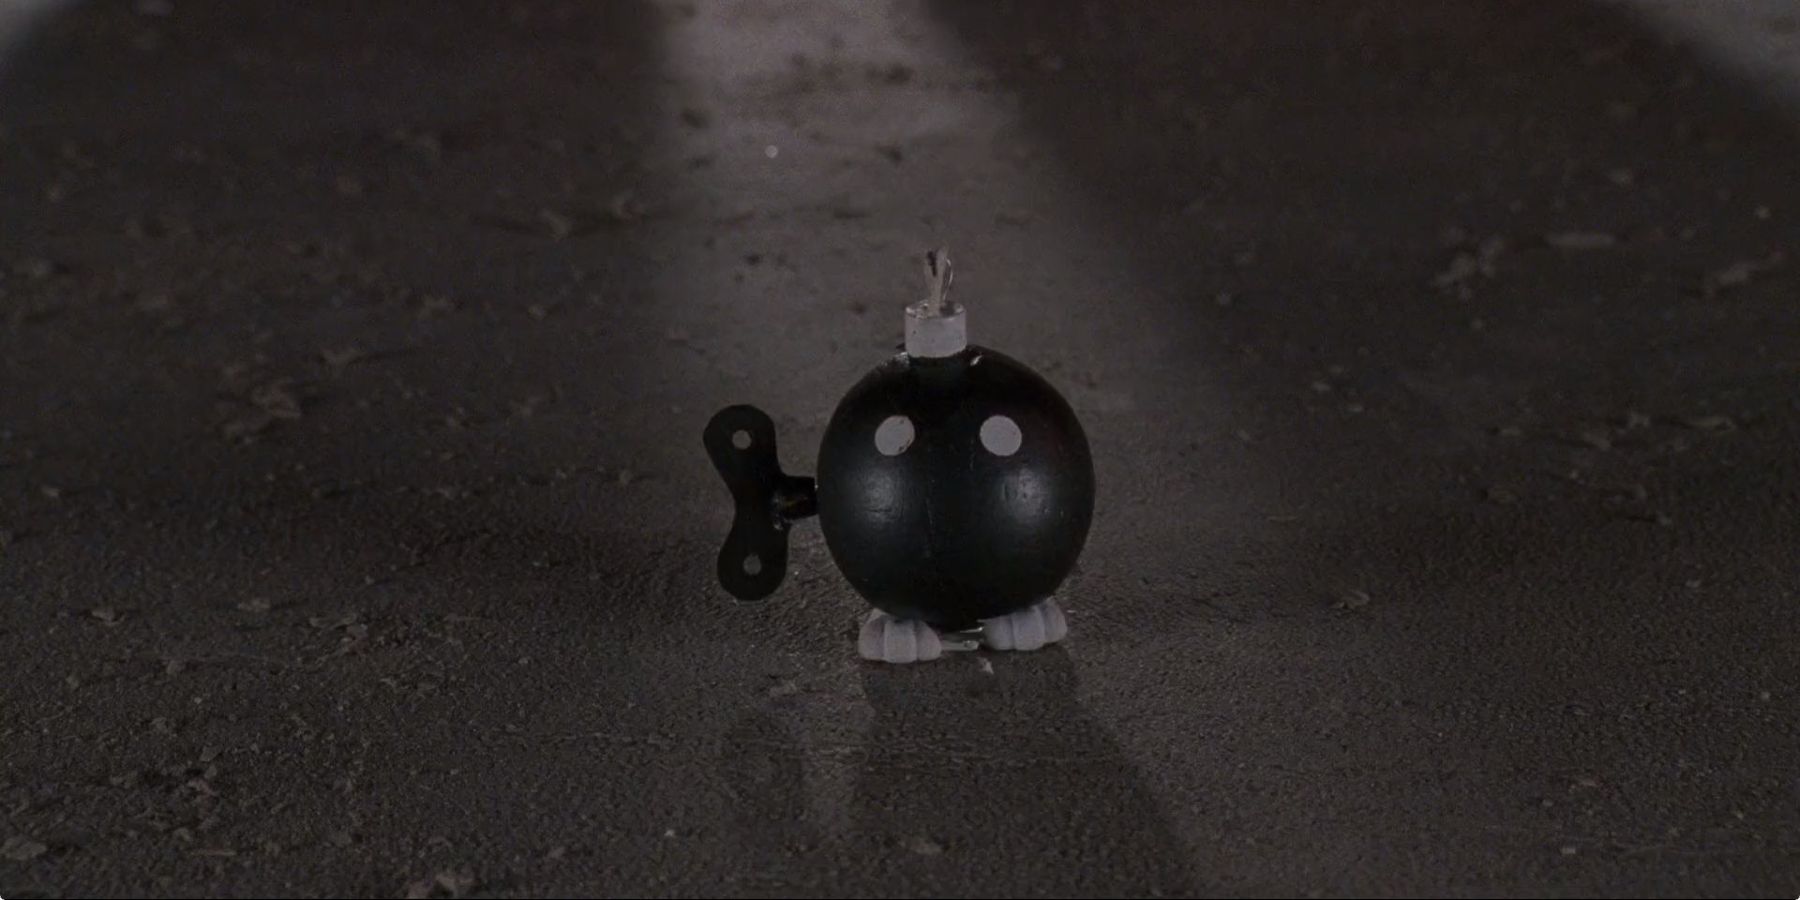 The Bob-Omb walking through the streets in Super Mario Bros 1993